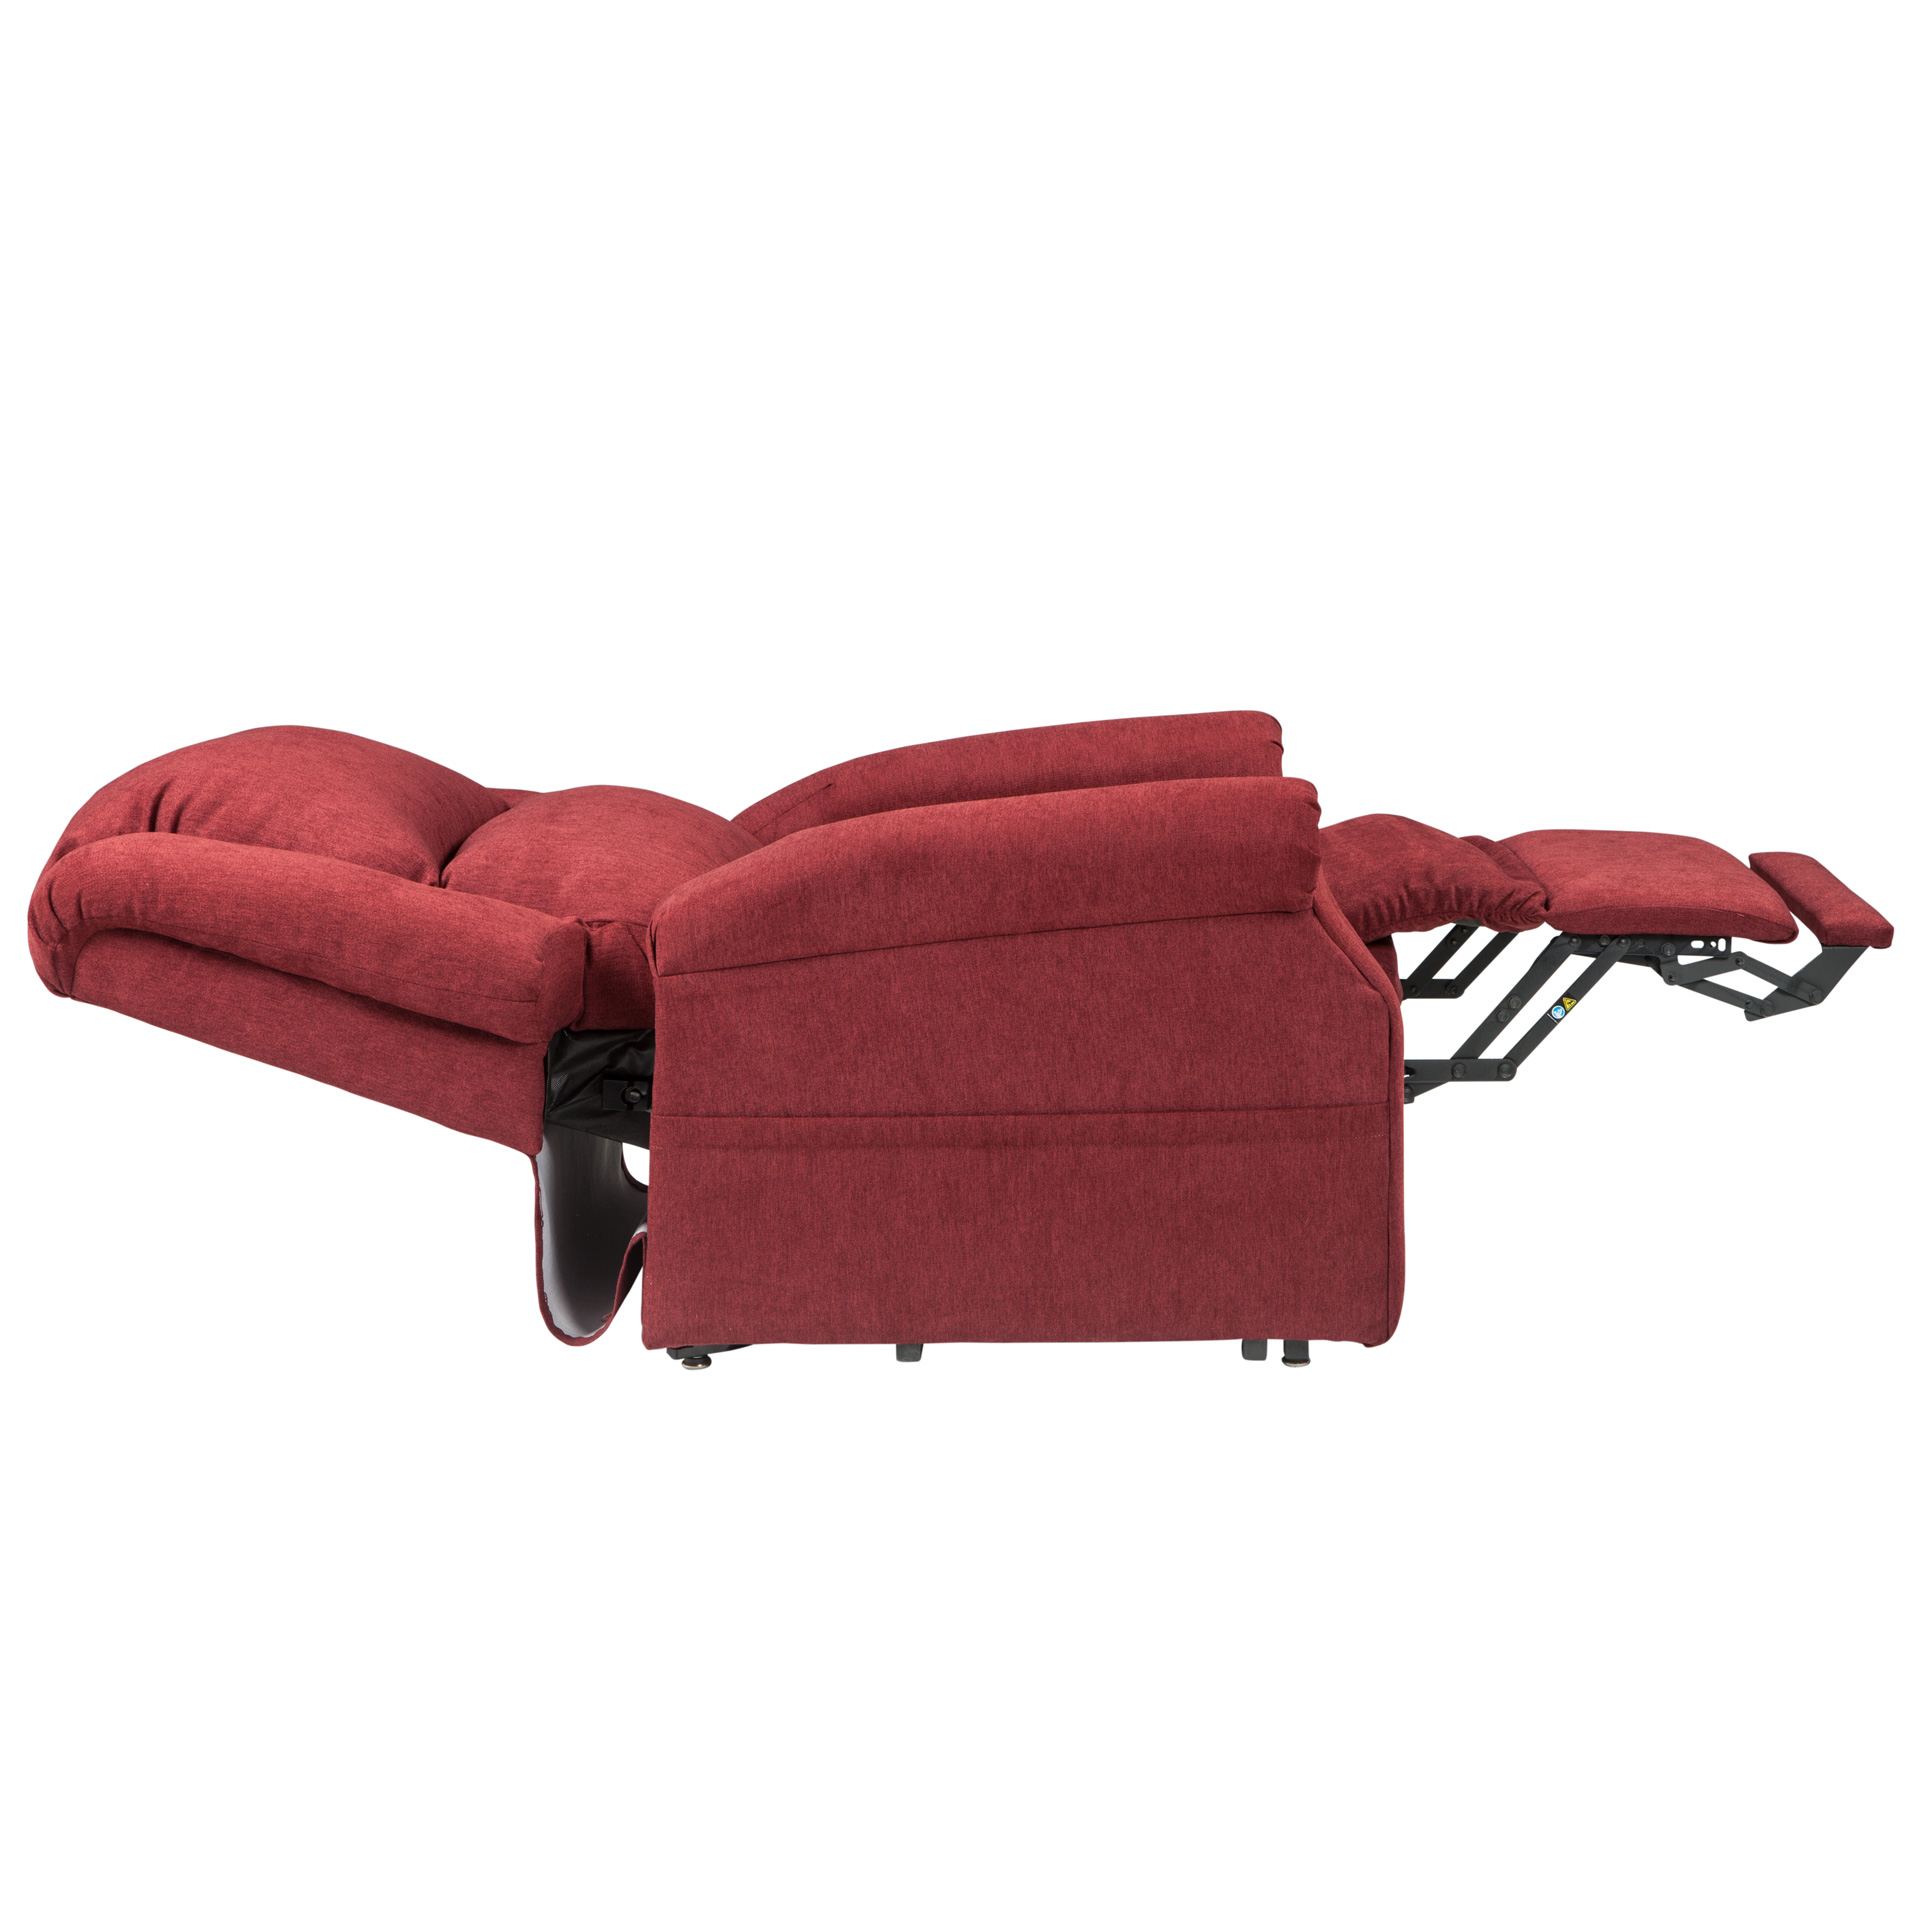 The MM-101 Power Lift Medical Recliner in the Lay-Flat position.